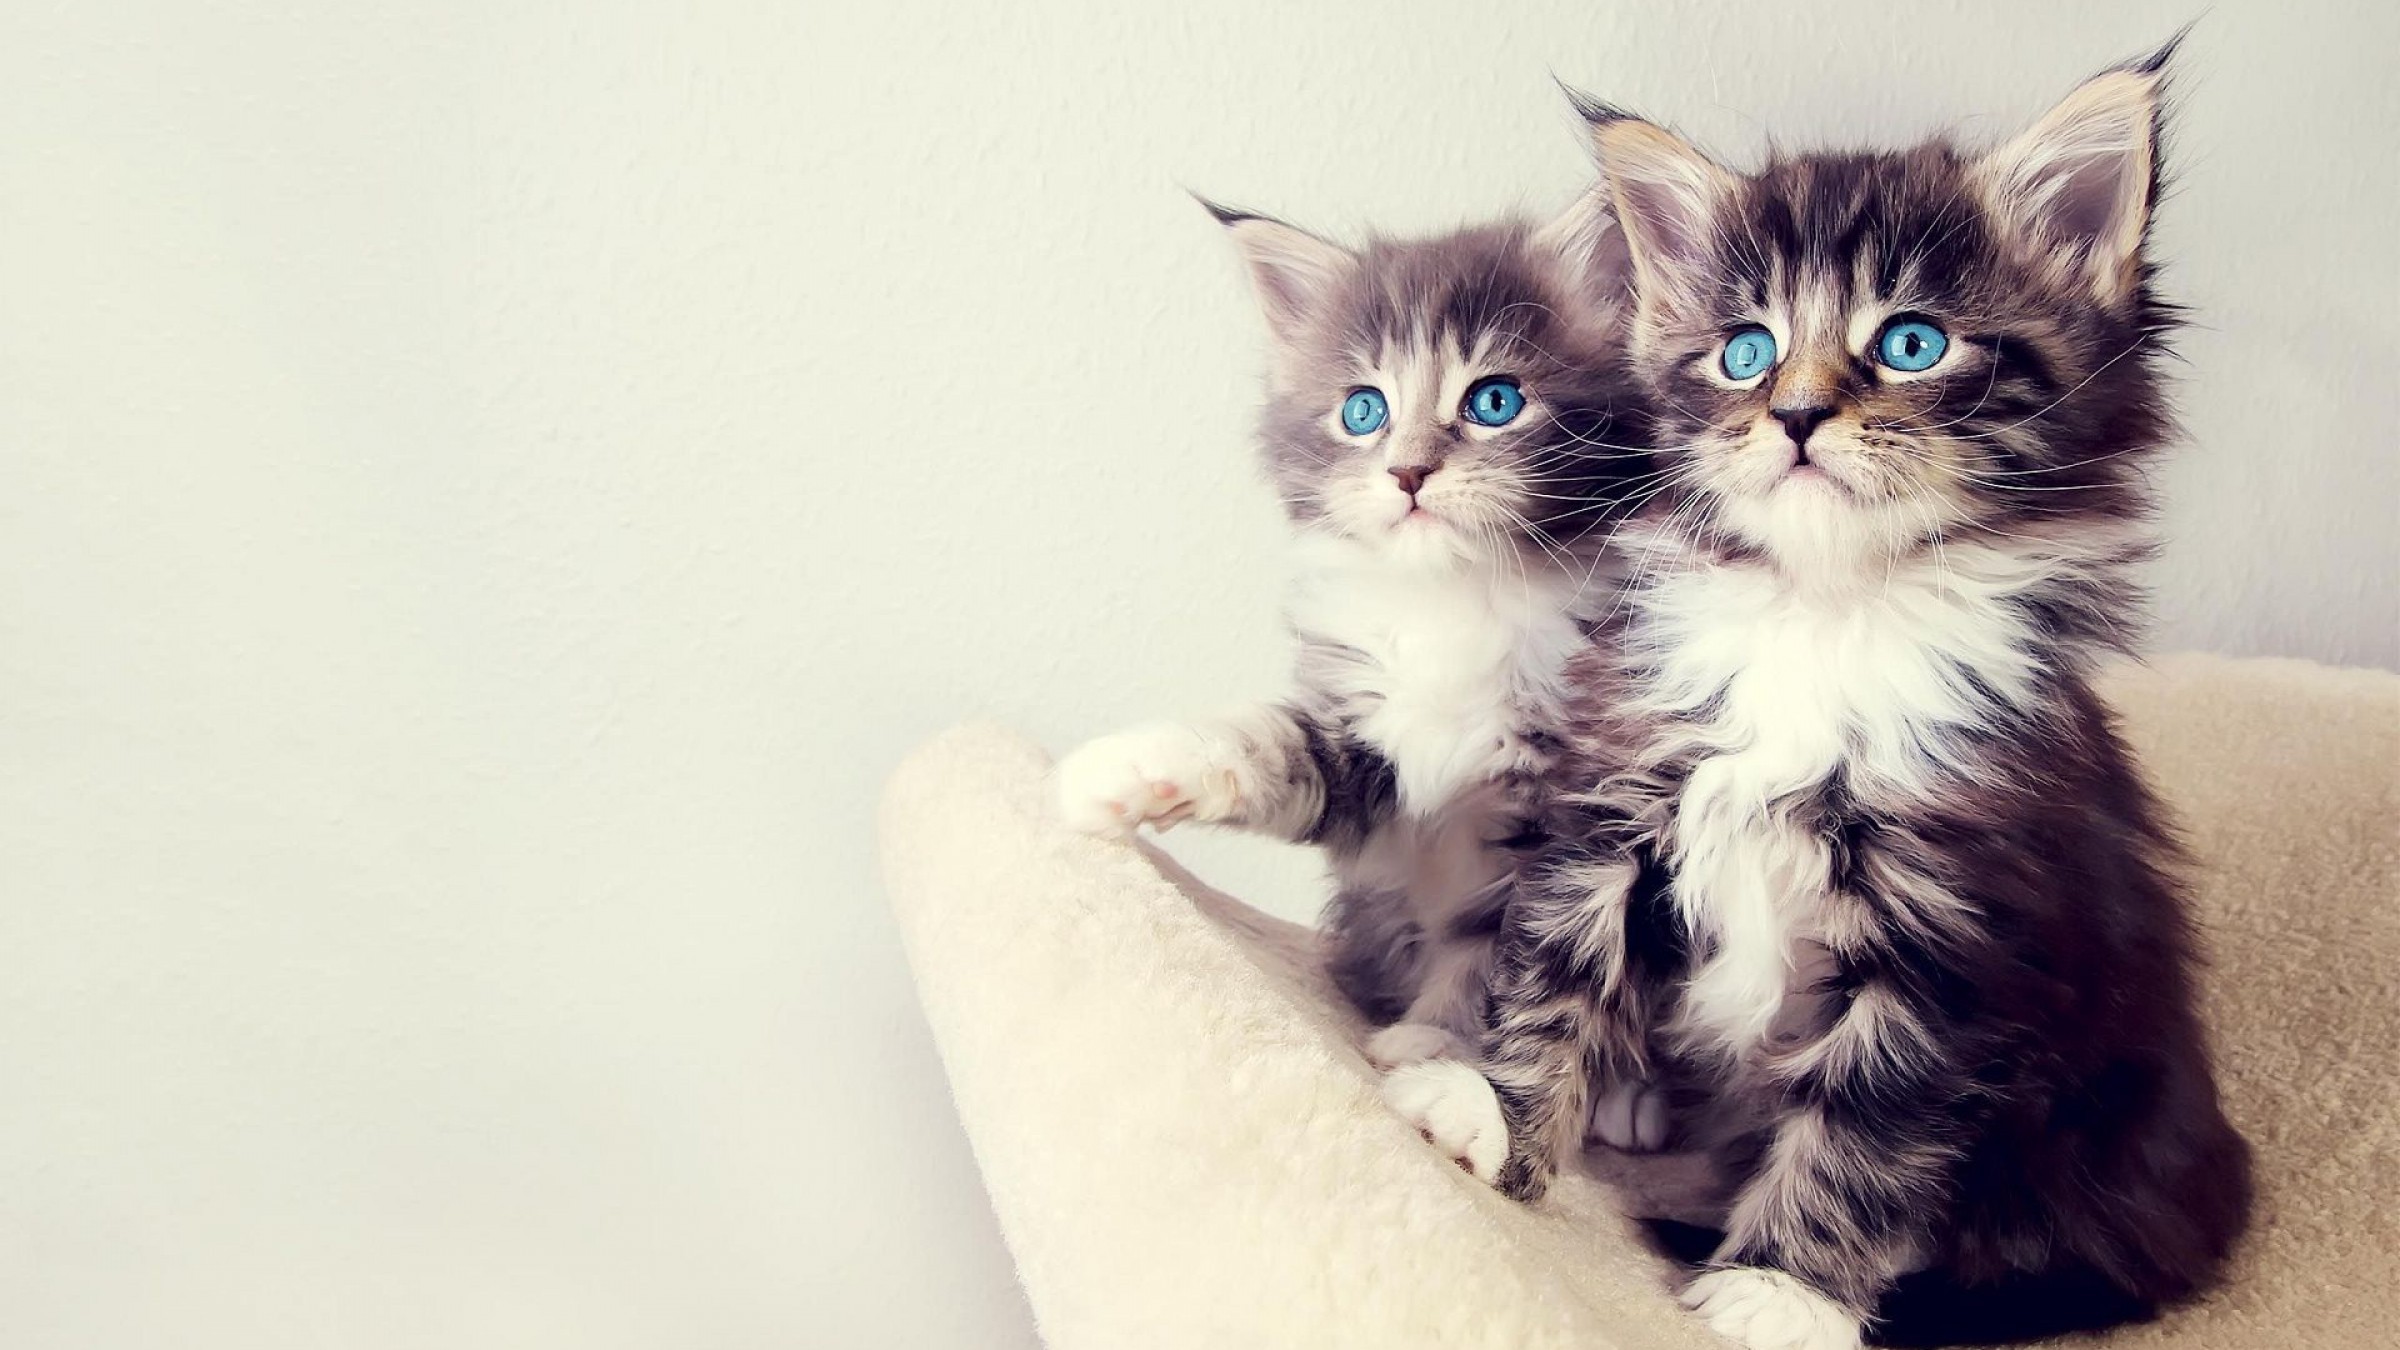 Kittens Simple Background Cats Blue Eyes Animals Maine Coon Cat Maine Coon 2400x1350